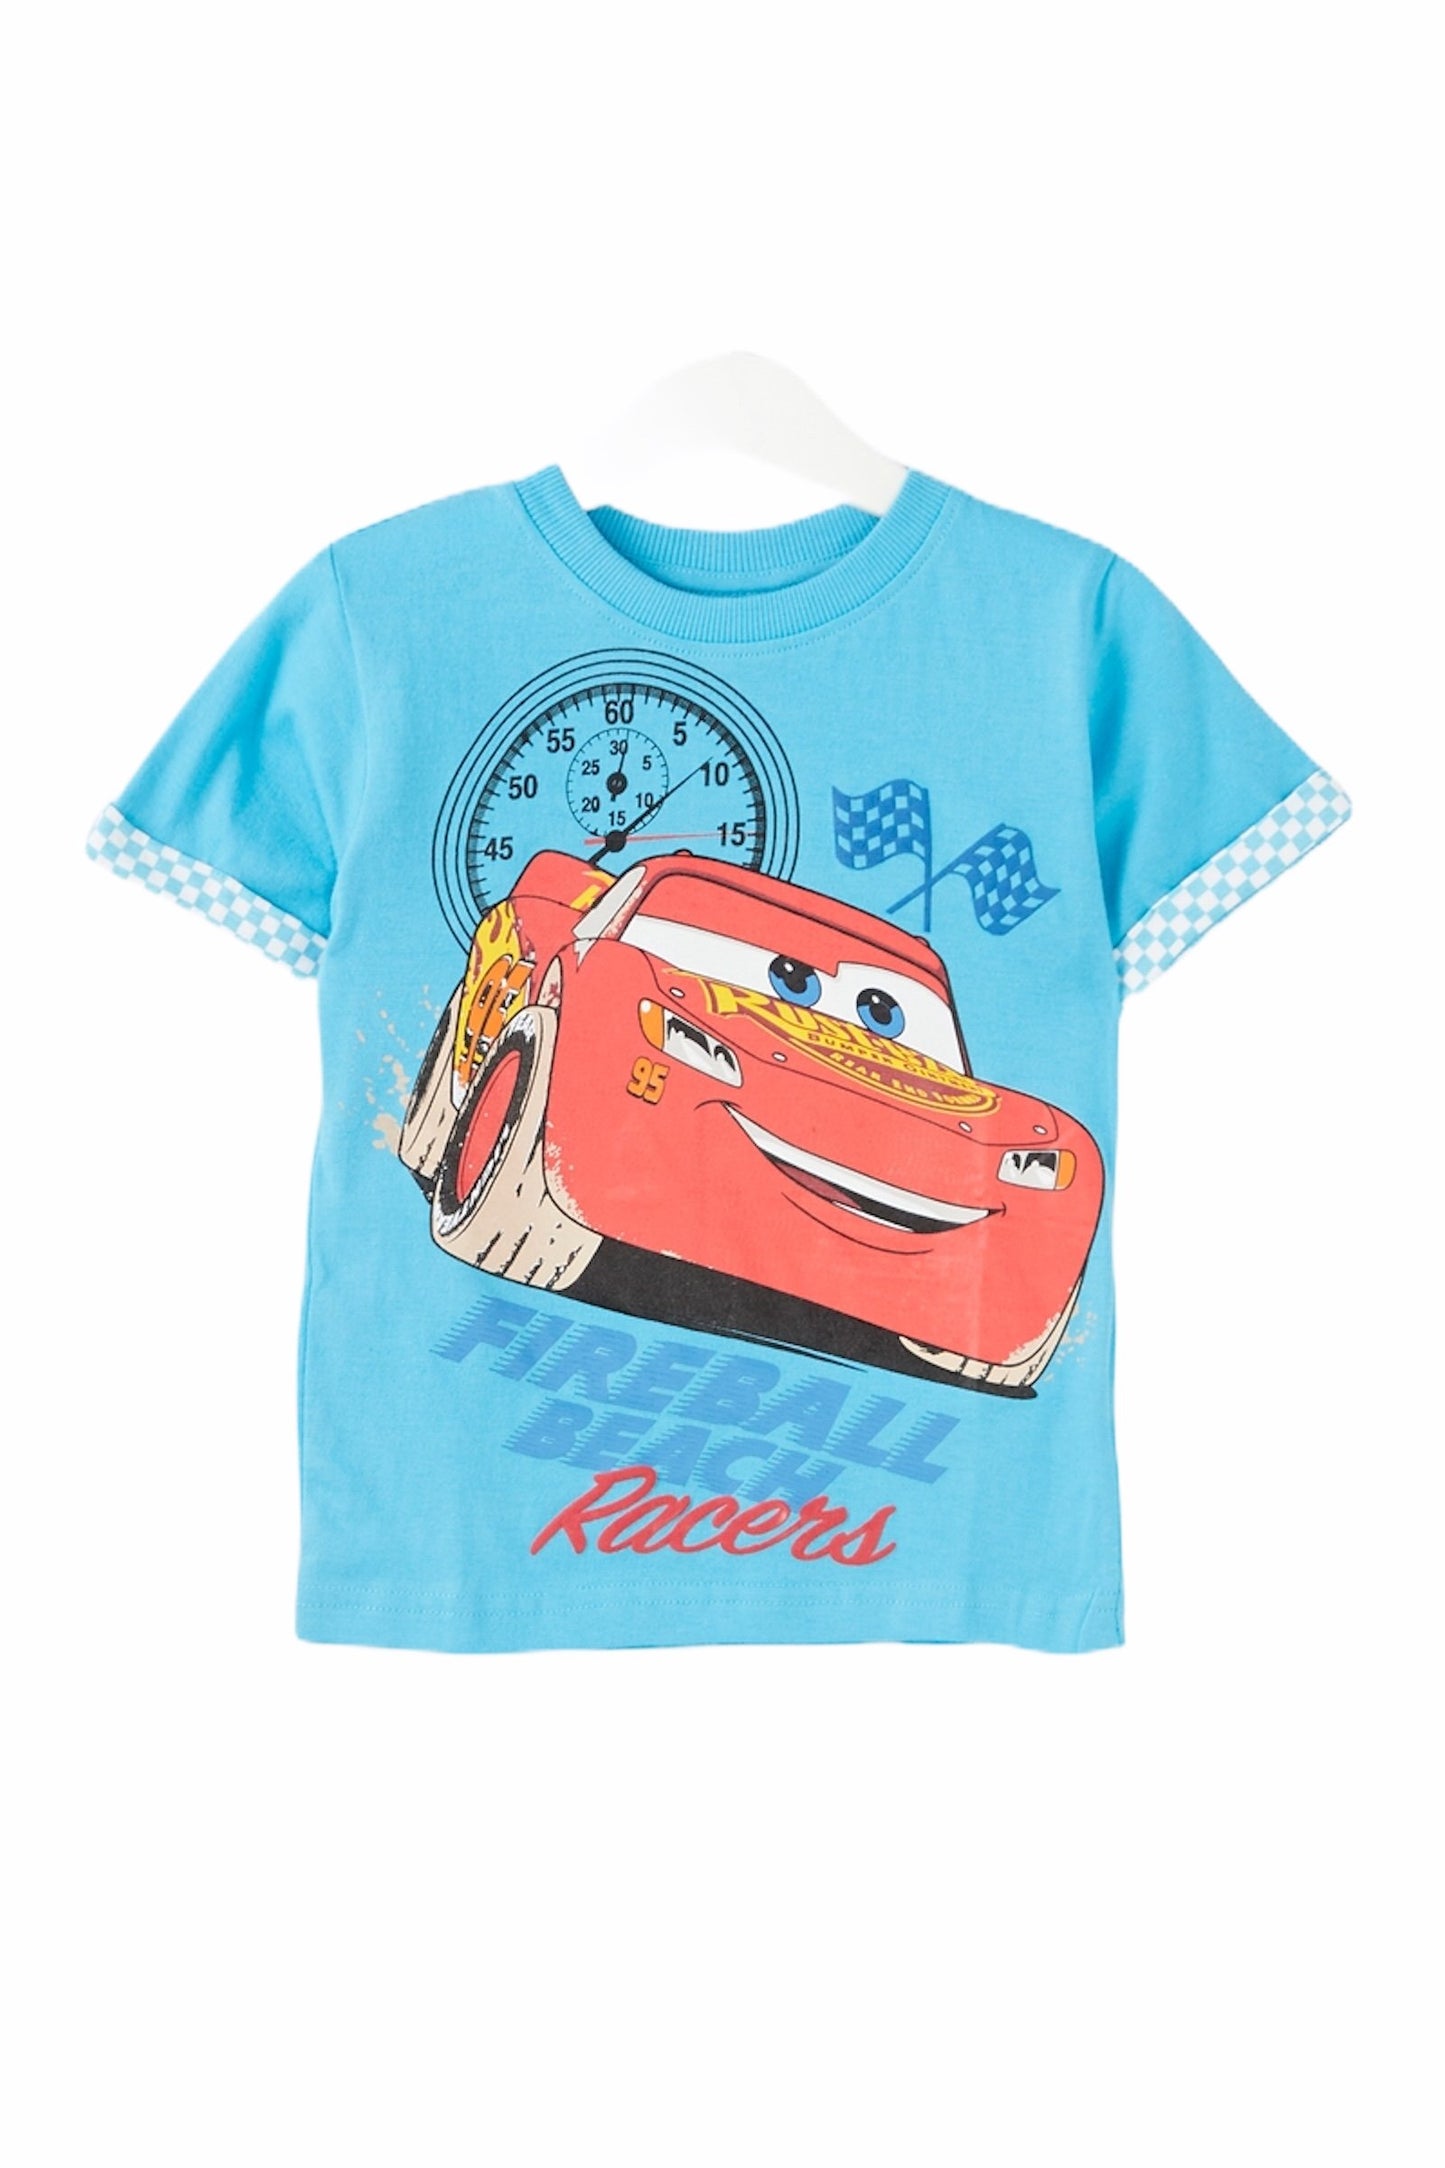 Kids Disney Car T Shirt in Blue or White - Glo Selections Kids Shoes